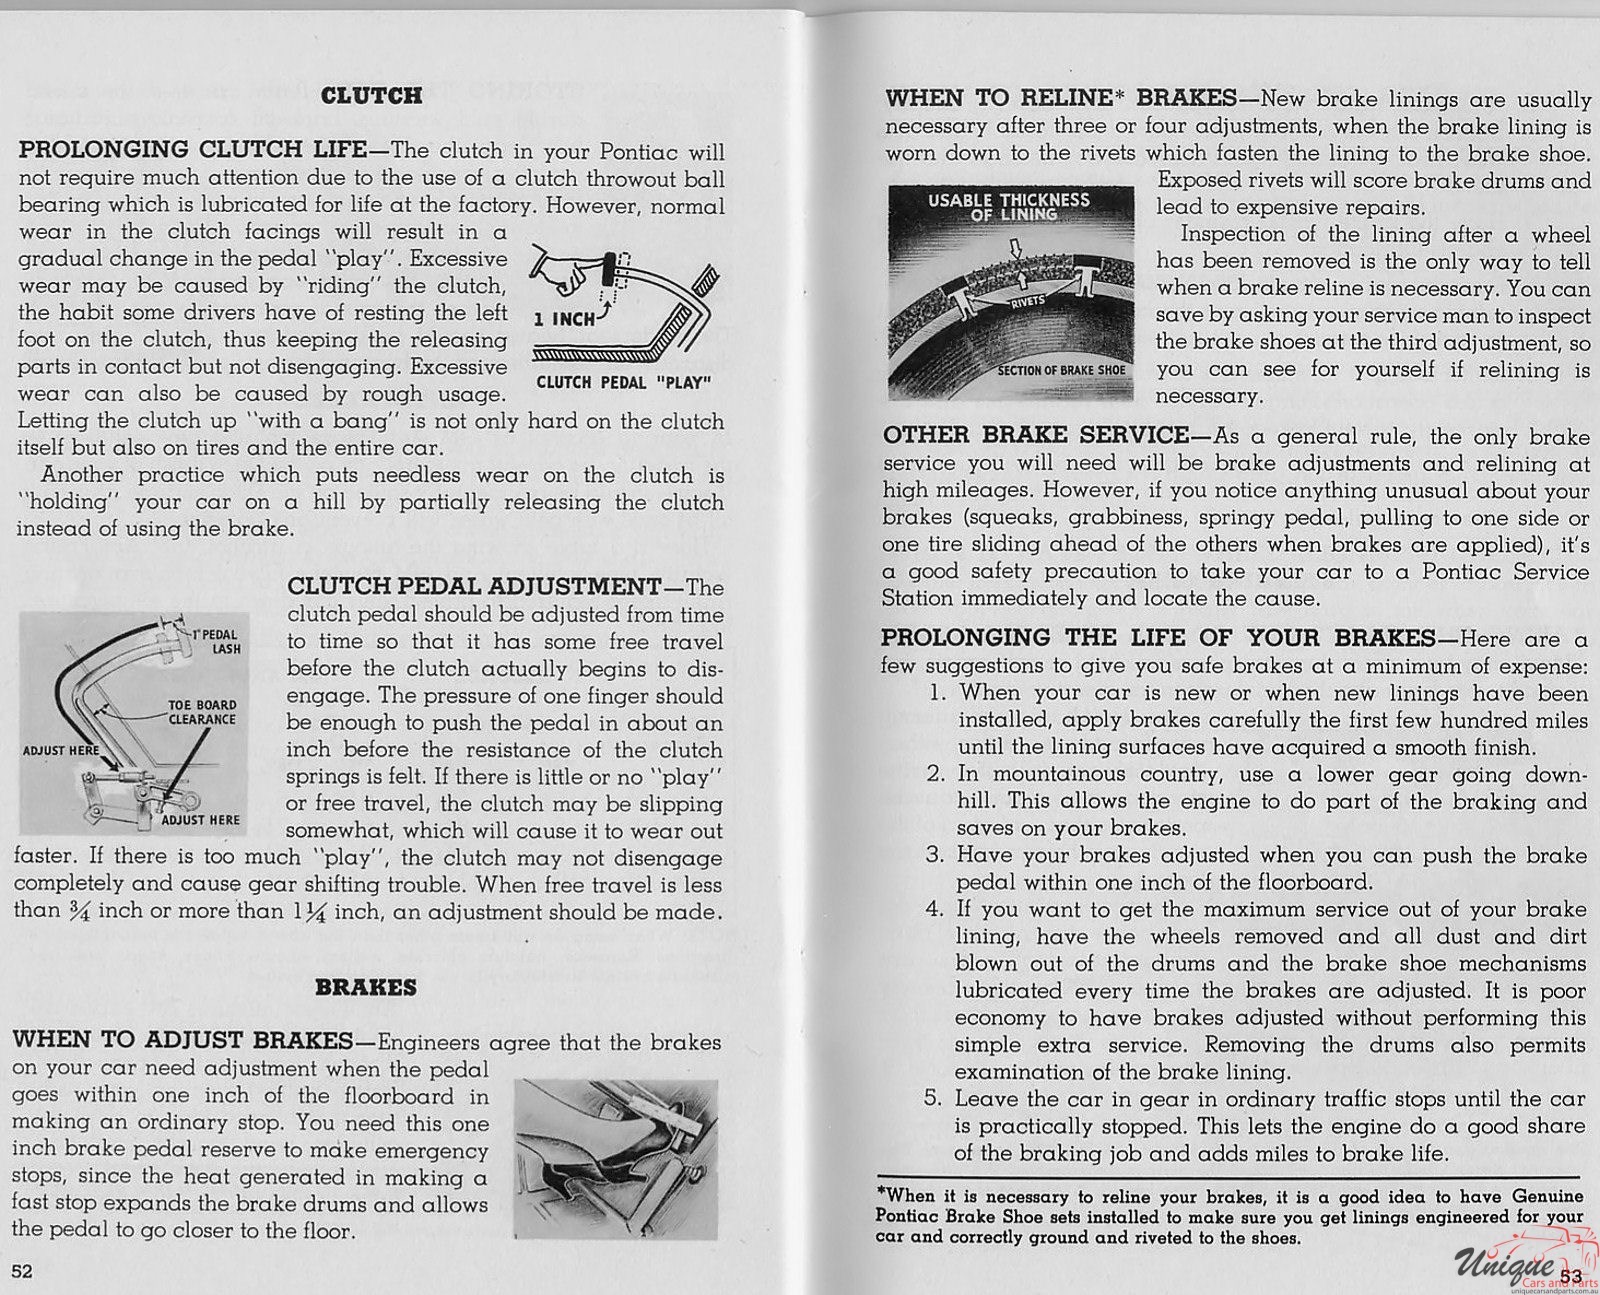 1950 Pontiac Owners Manual Page 9